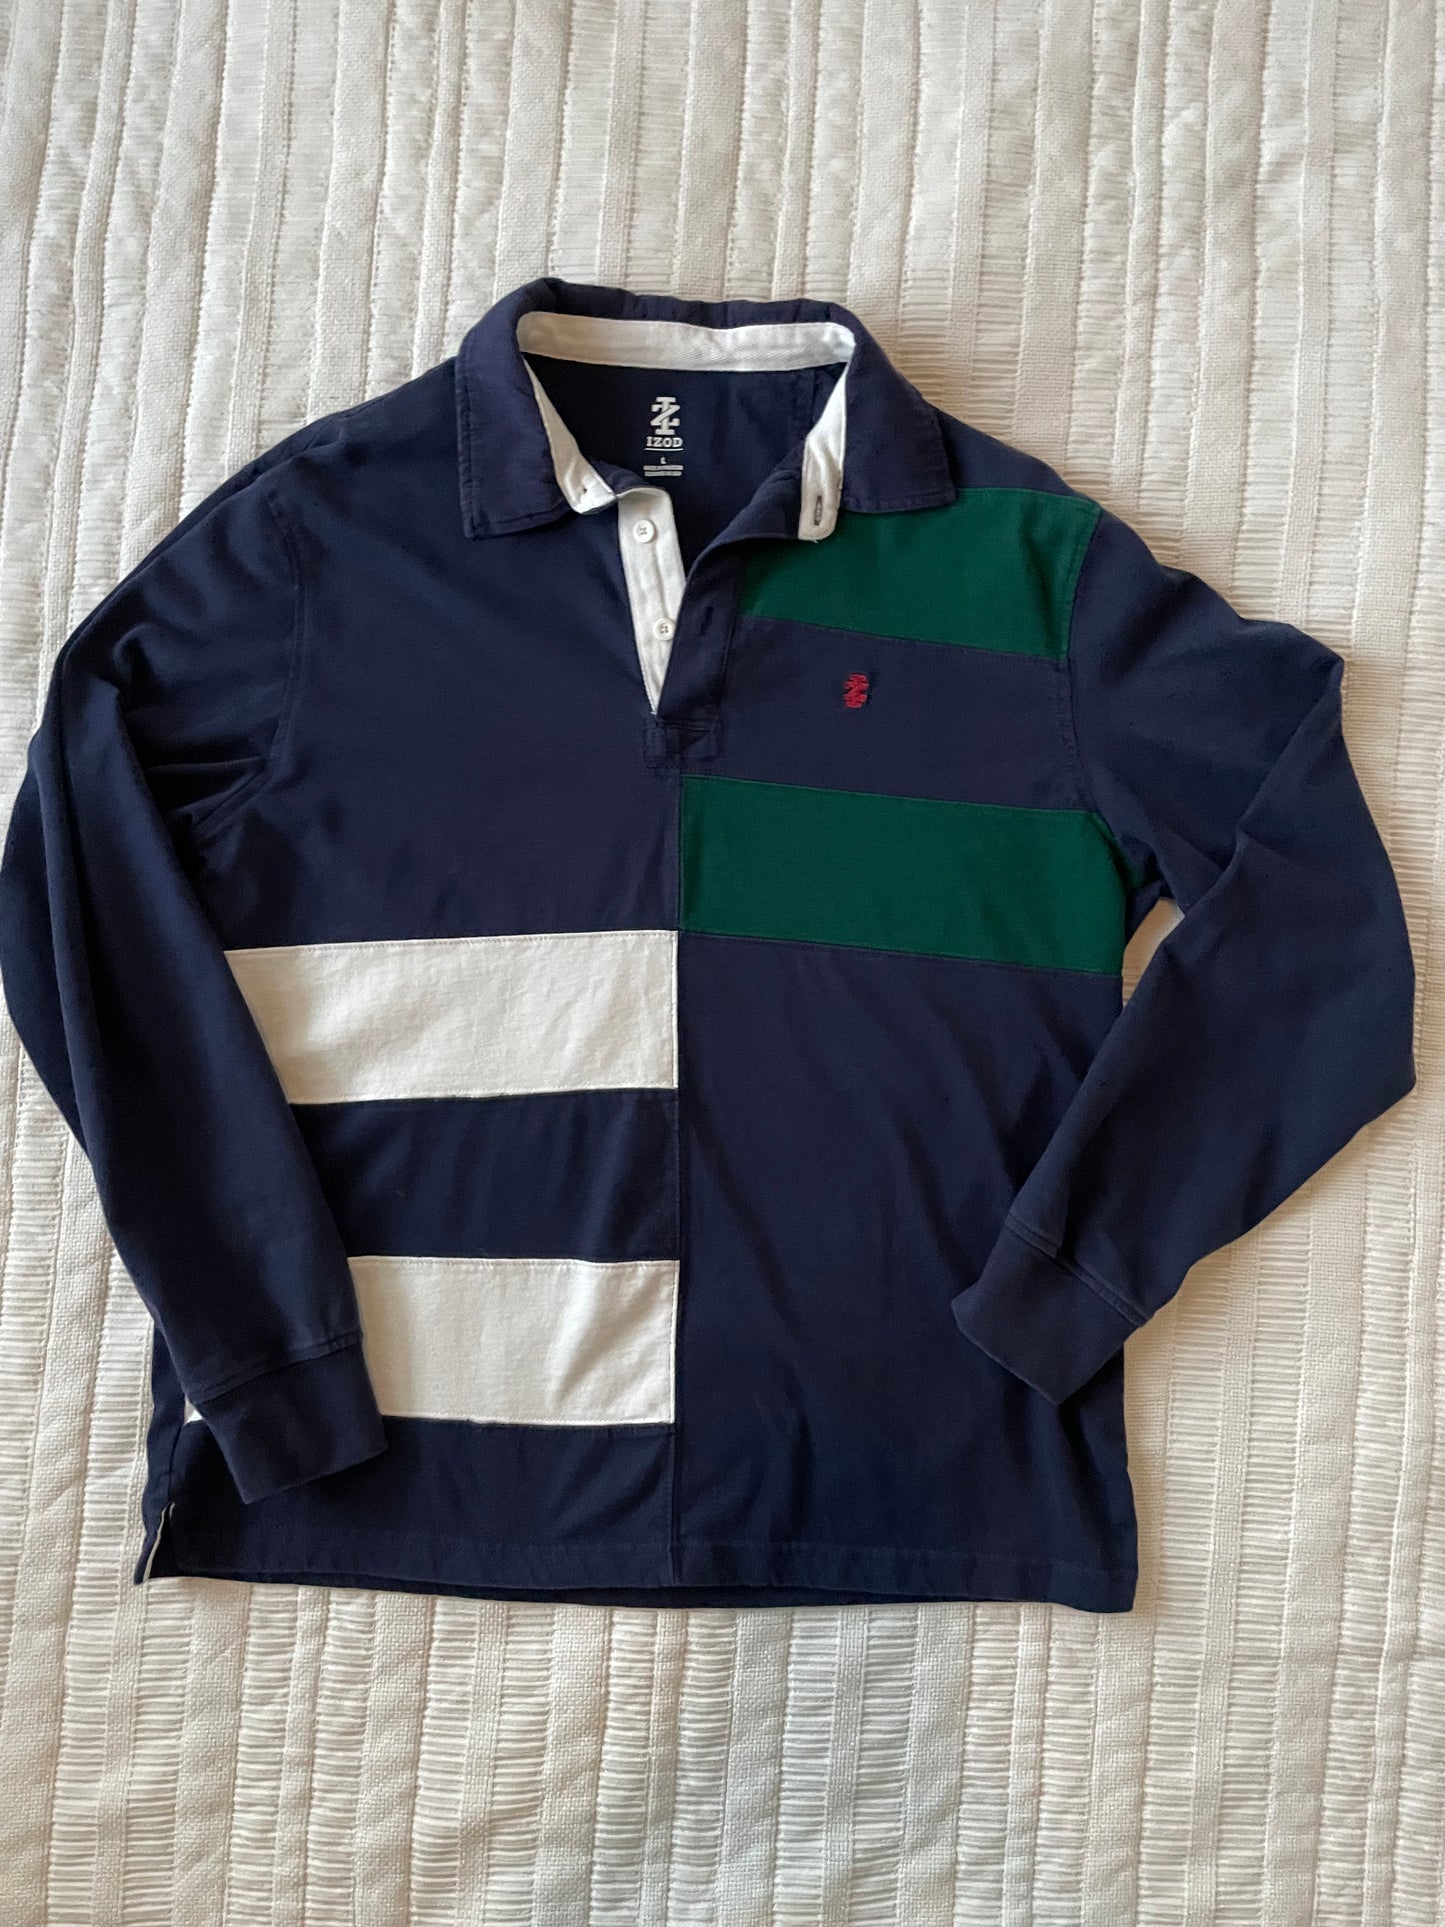 1990 IZOD Rugby